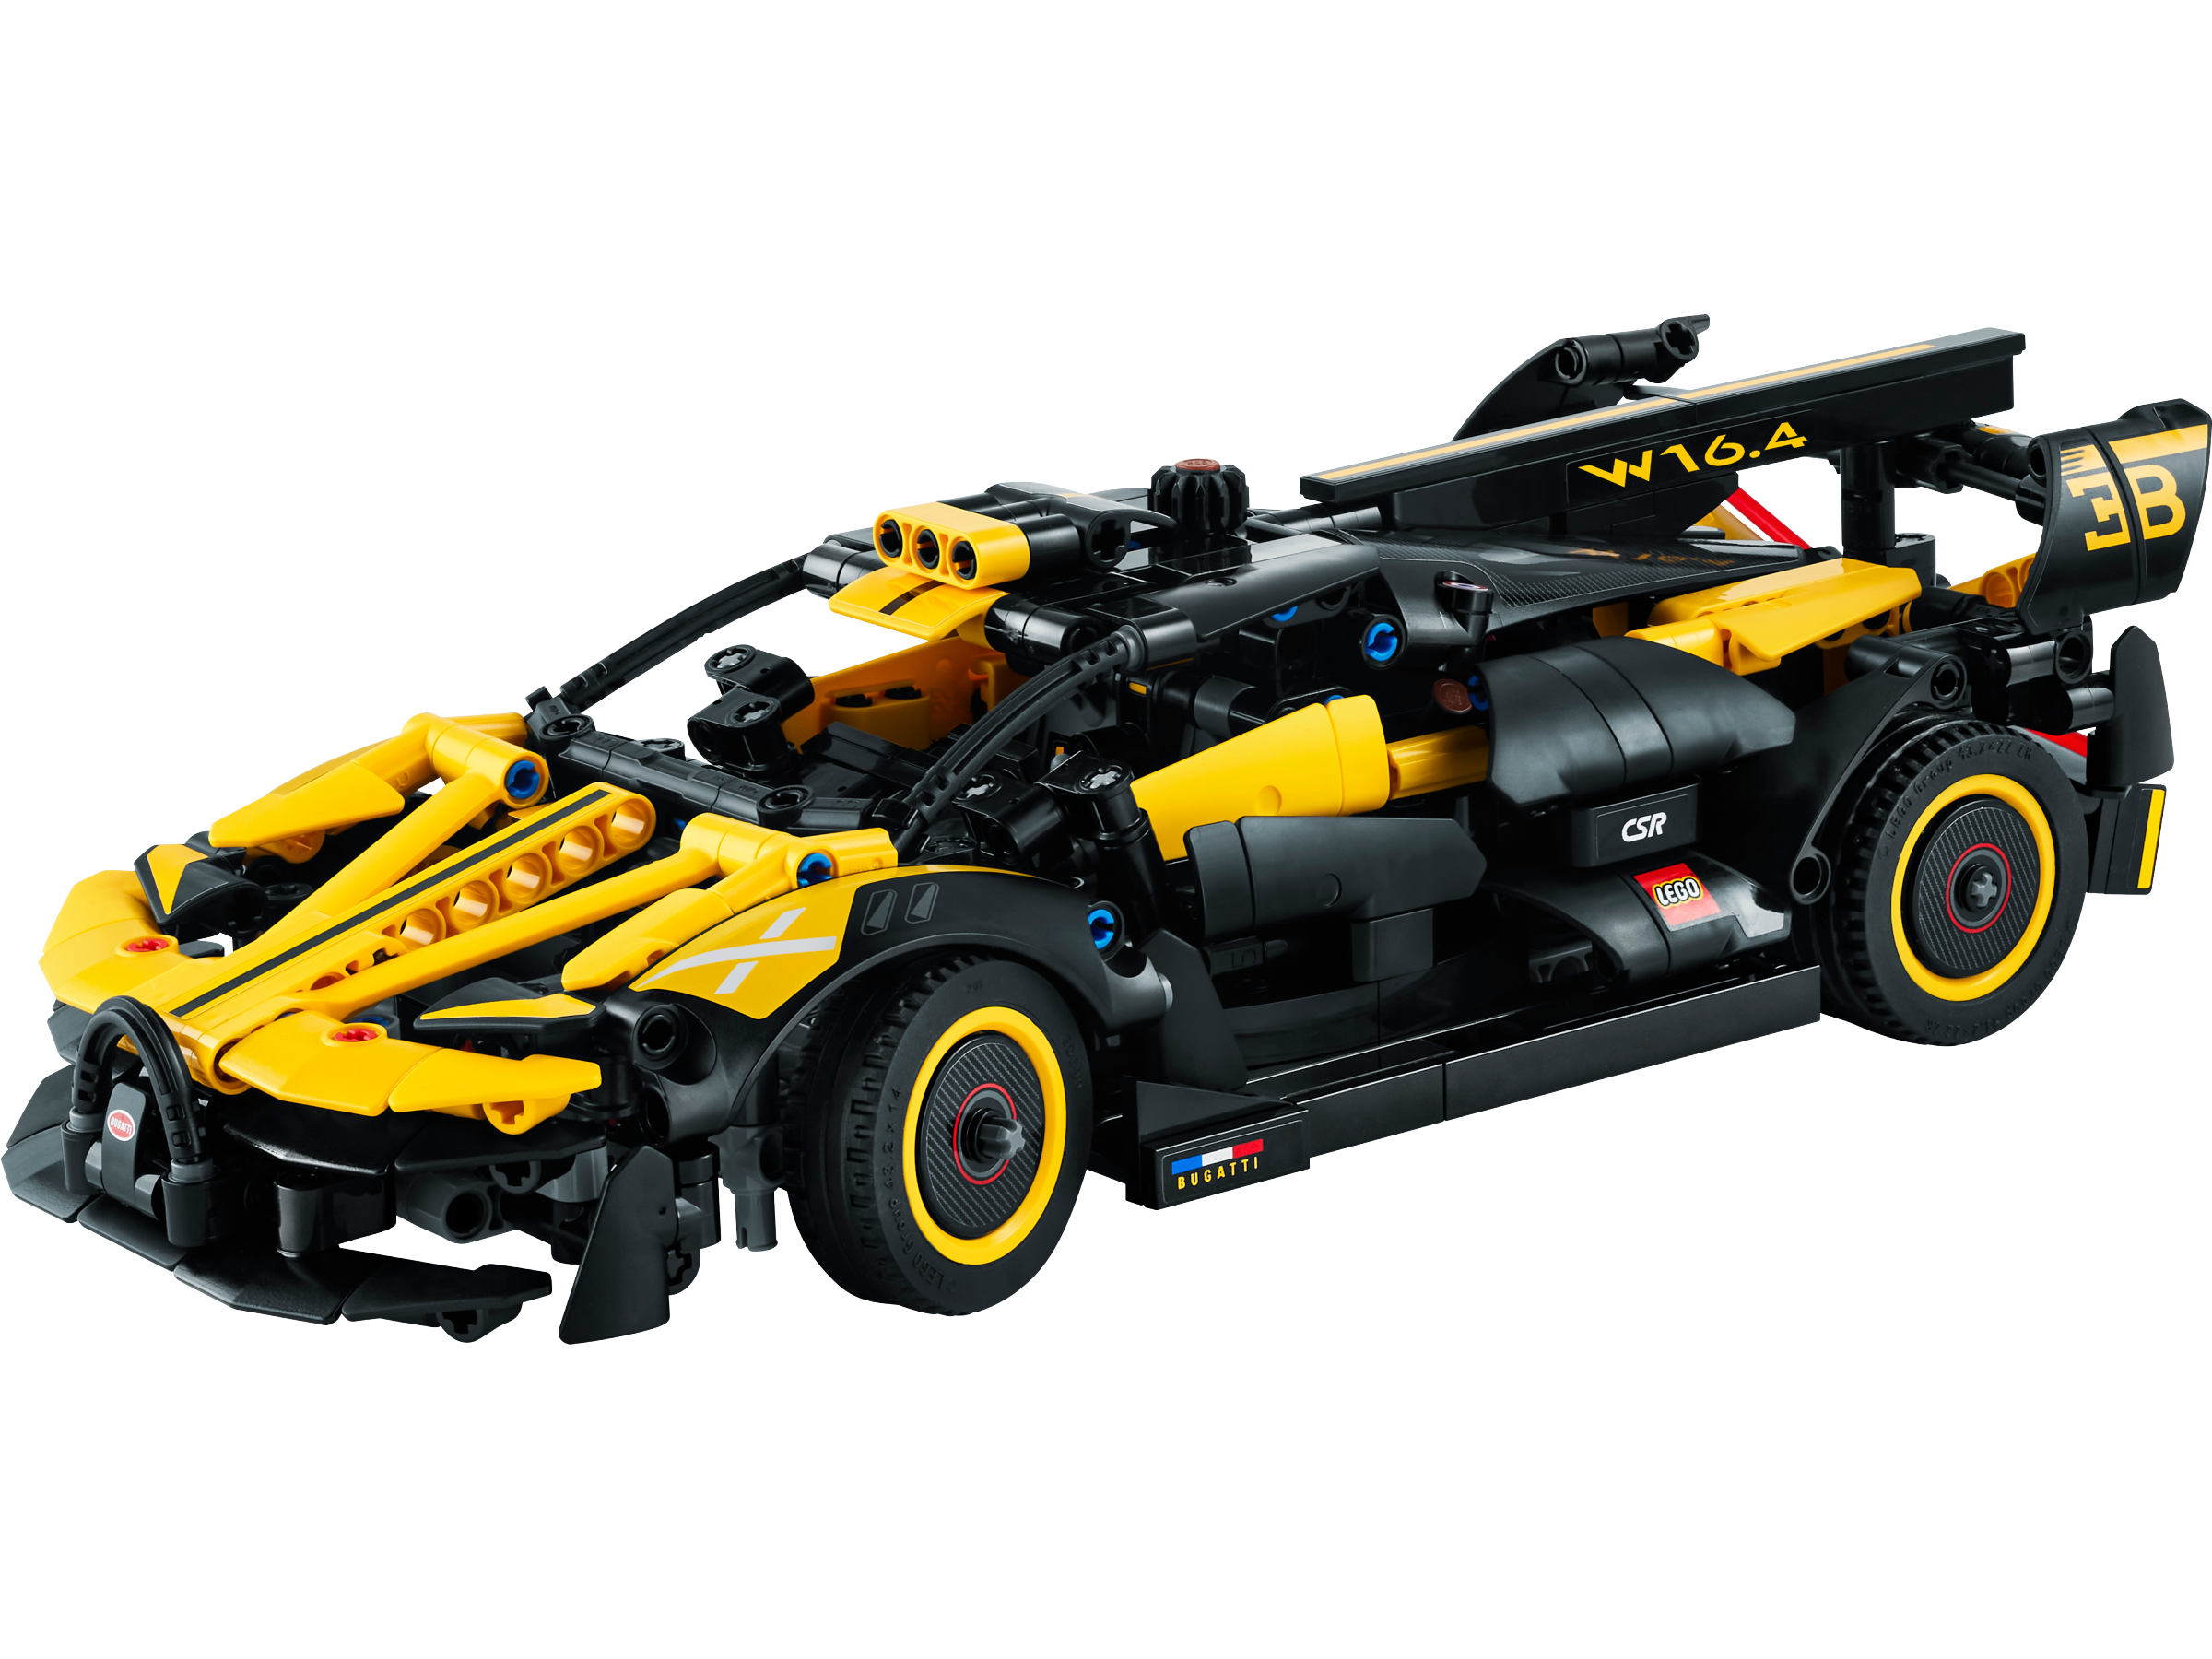 Wennen aan tsunami kwaliteit Bugatti Bolide 42151 | Technic™ | Buy online at the Official LEGO® Shop US